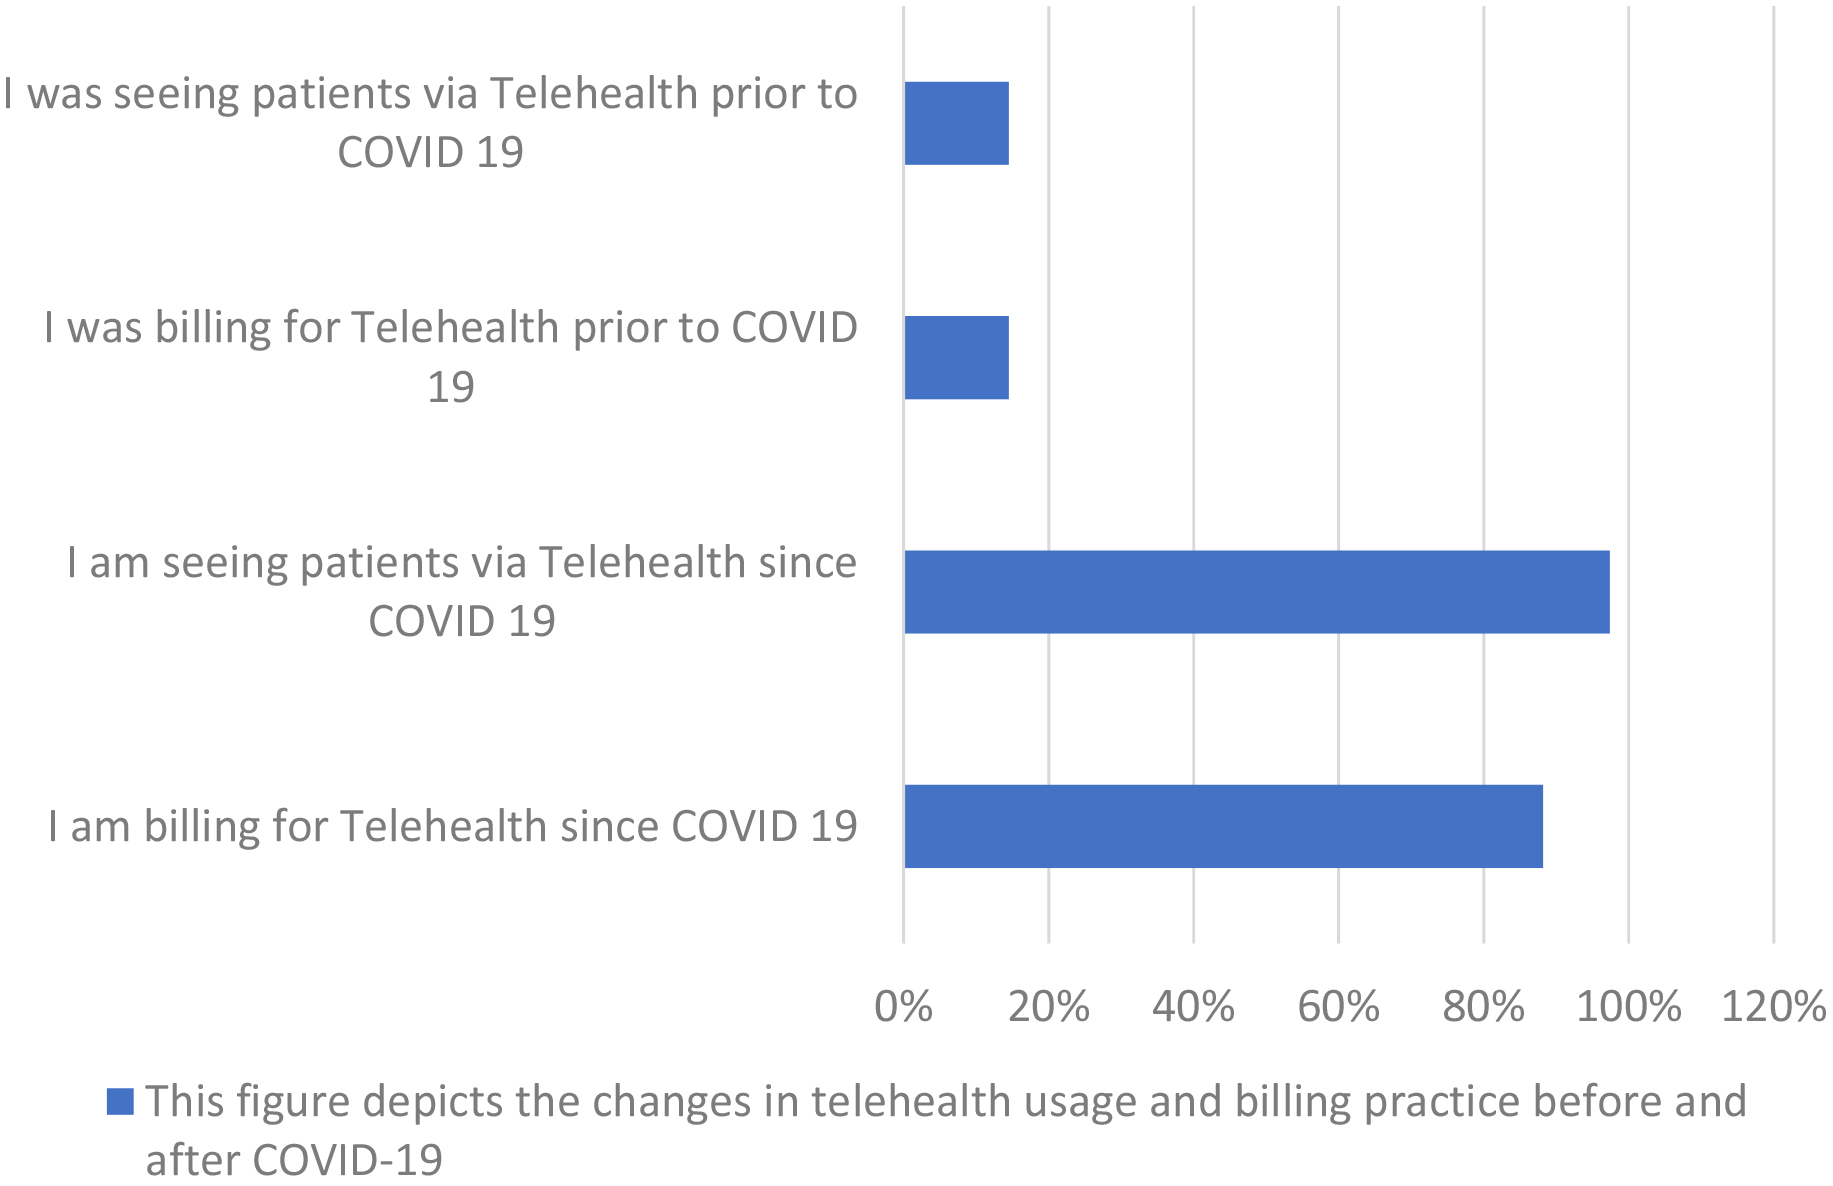 Telehealth practices before and after COVID-19.